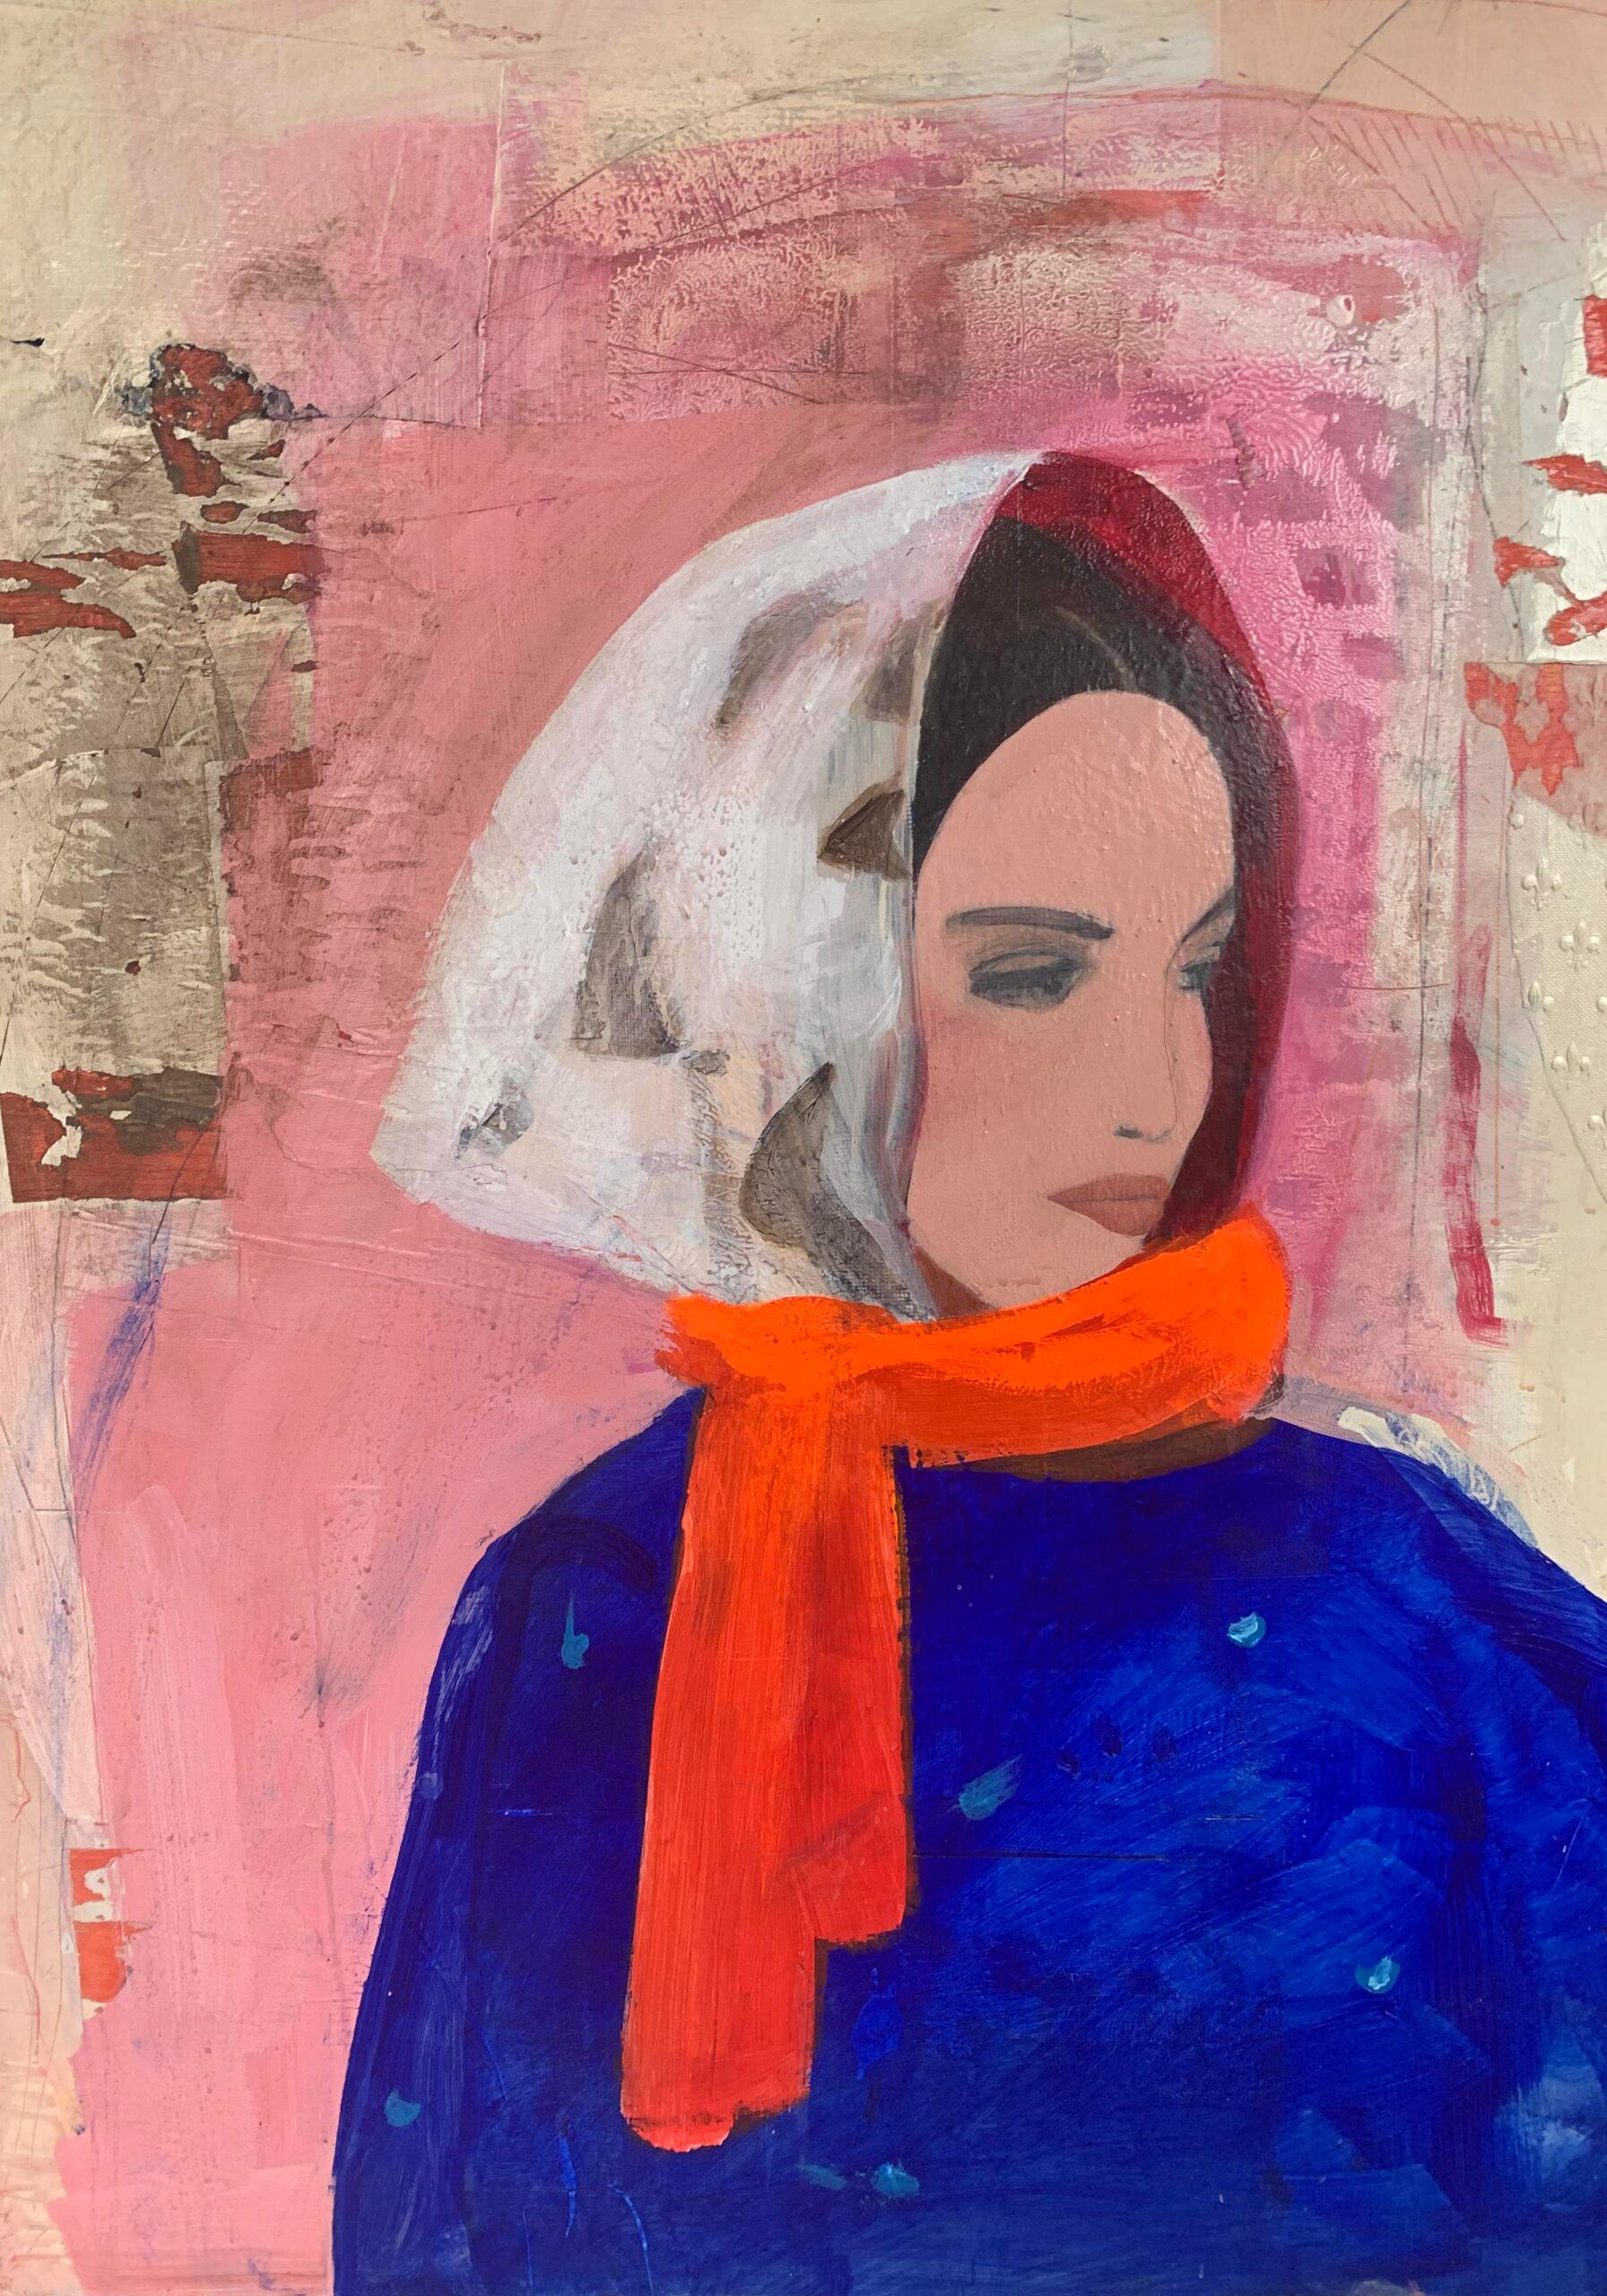 Nicolle Menegaldo Figurative Painting - Woman in Blue with Headscarf - Bright Colour Portrait, Women, Texture, Face